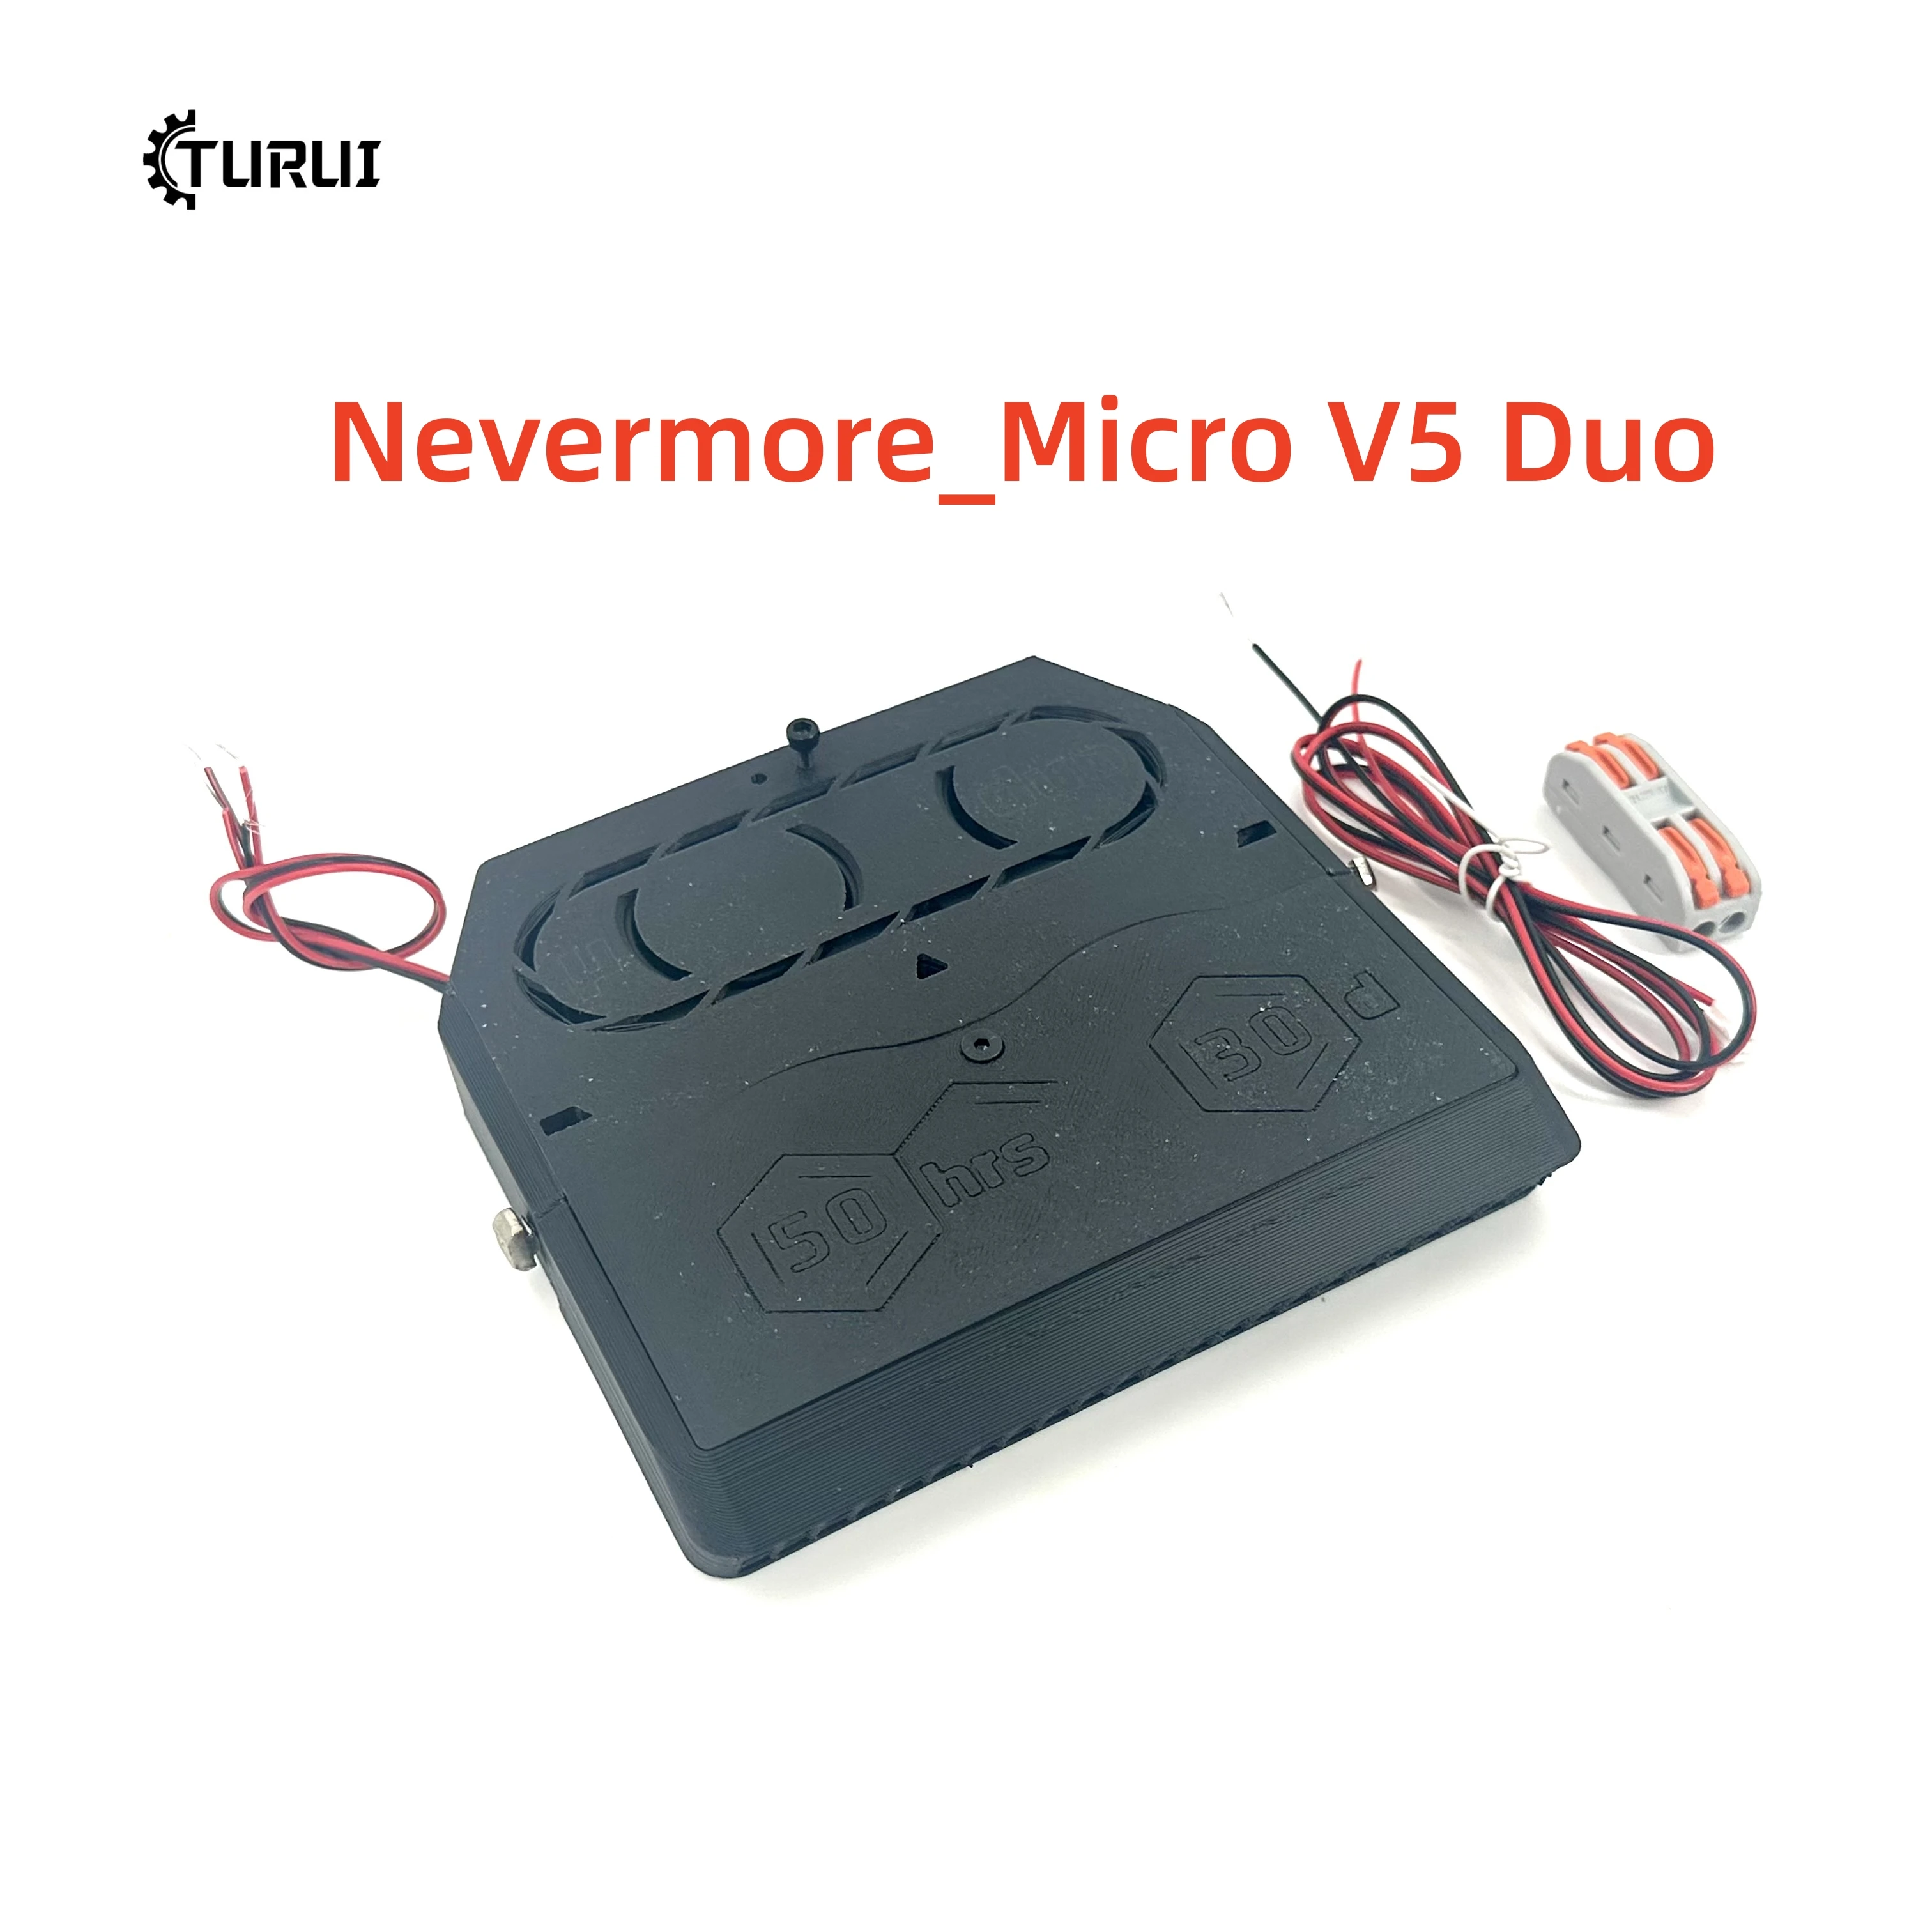 

TURUI Nevermore Micro V5 Duo V2.4 V2 1.8 1.9 ABS 5015 Fan Air Filter Particle Filter Activated carbon ForVORON V0.1 V0.2 Trident